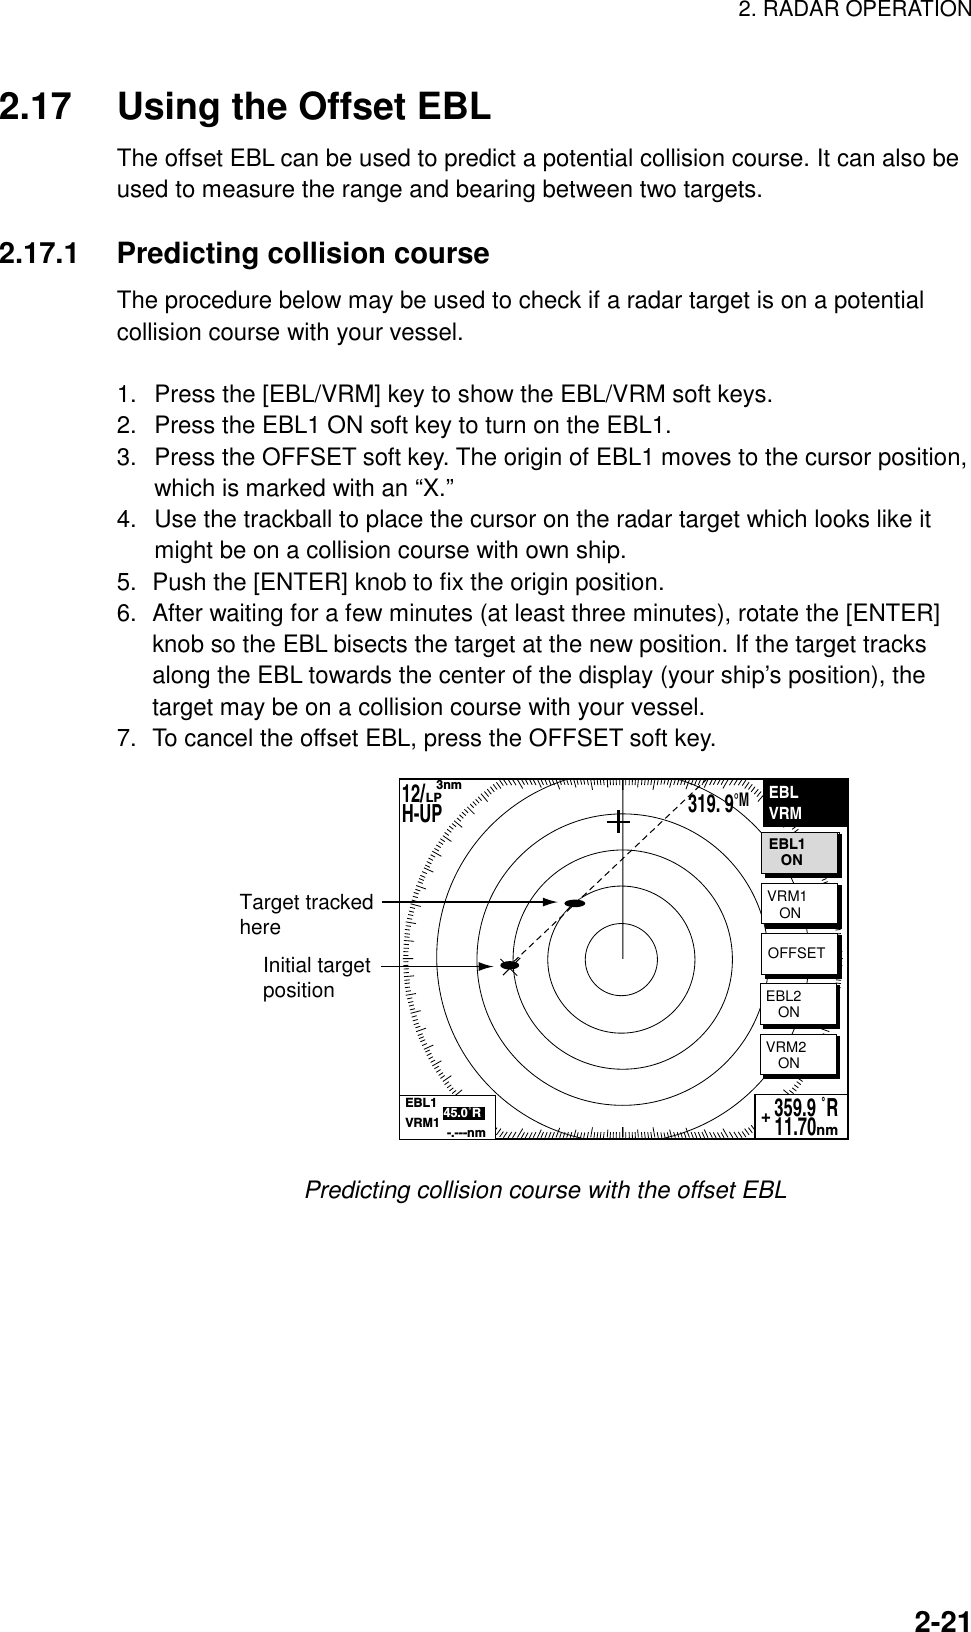 2. RADAR OPERATION    2-212.17  Using the Offset EBL The offset EBL can be used to predict a potential collision course. It can also be used to measure the range and bearing between two targets.  2.17.1  Predicting collision course The procedure below may be used to check if a radar target is on a potential collision course with your vessel.    1.  Press the [EBL/VRM] key to show the EBL/VRM soft keys. 2.  Press the EBL1 ON soft key to turn on the EBL1. 3.  Press the OFFSET soft key. The origin of EBL1 moves to the cursor position, which is marked with an “X.” 4.  Use the trackball to place the cursor on the radar target which looks like it might be on a collision course with own ship. 5.  Push the [ENTER] knob to fix the origin position. 6.  After waiting for a few minutes (at least three minutes), rotate the [ENTER] knob so the EBL bisects the target at the new position. If the target tracks along the EBL towards the center of the display (your ship’s position), the target may be on a collision course with your vessel. 7.  To cancel the offset EBL, press the OFFSET soft key. EBLVRMVRM1   ONVRM2   ON359.9 ˚R 11.70nm+Initial targetpositionTarget trackedhereOFFSETEBL2   ONEBL1           45.0˚RVRM1            -.---nmEBL1   ON12/H-UP    3nmLP319. 9°M Predicting collision course with the offset EBL  